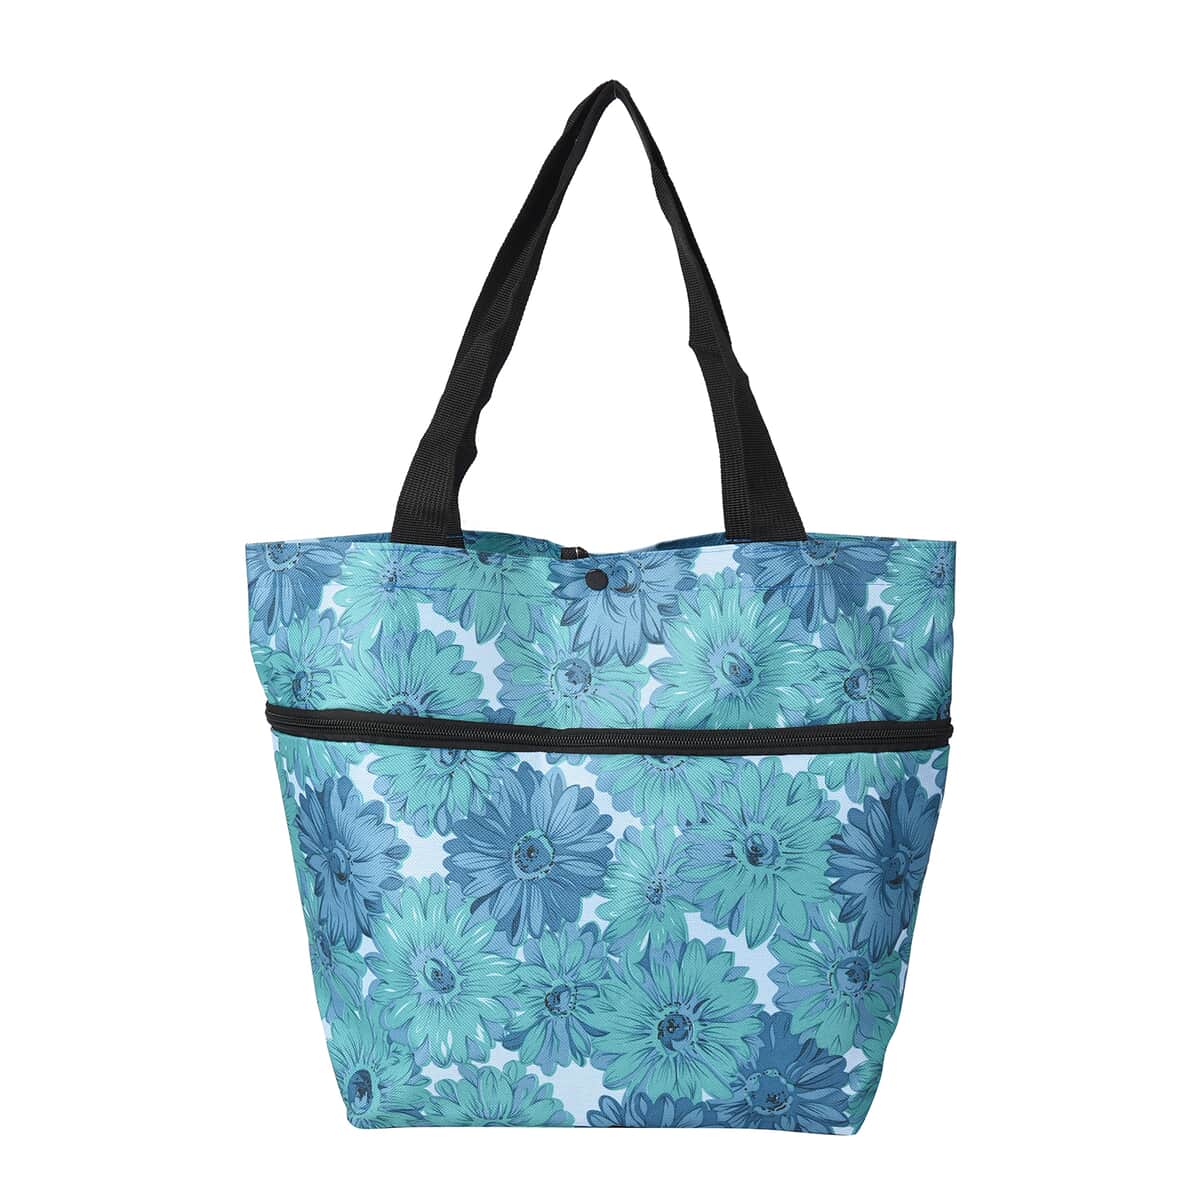 Gerbera Daisy Pattern Foldable Shopping Bag with Rollers image number 0